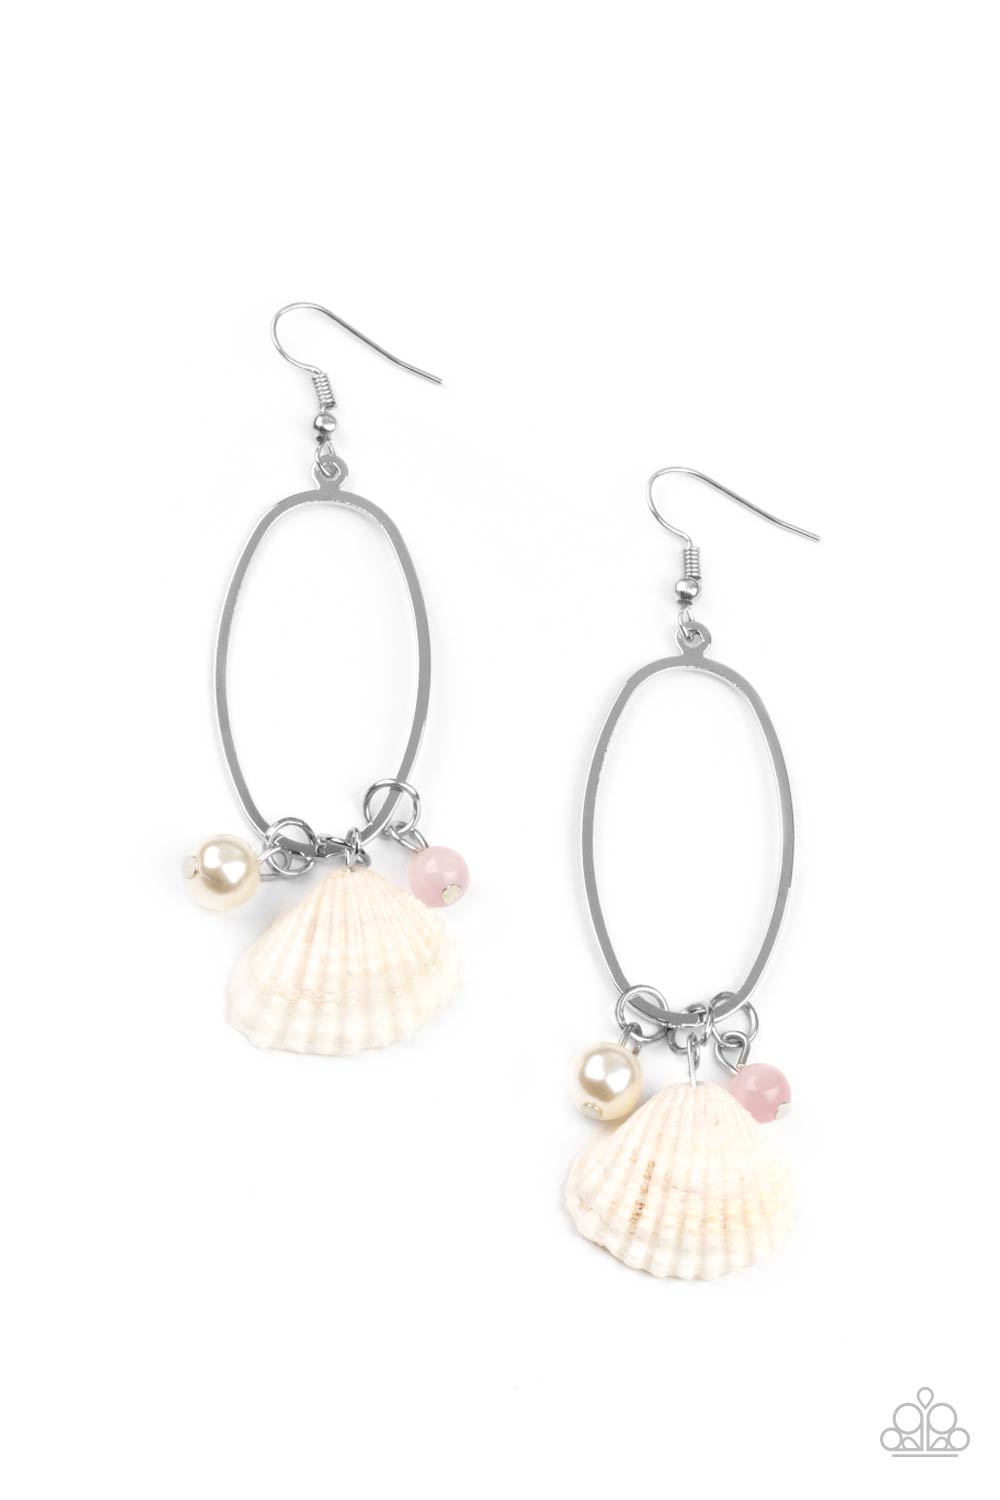 Paparazzi Earring -This Too SHELL Pass - Pink